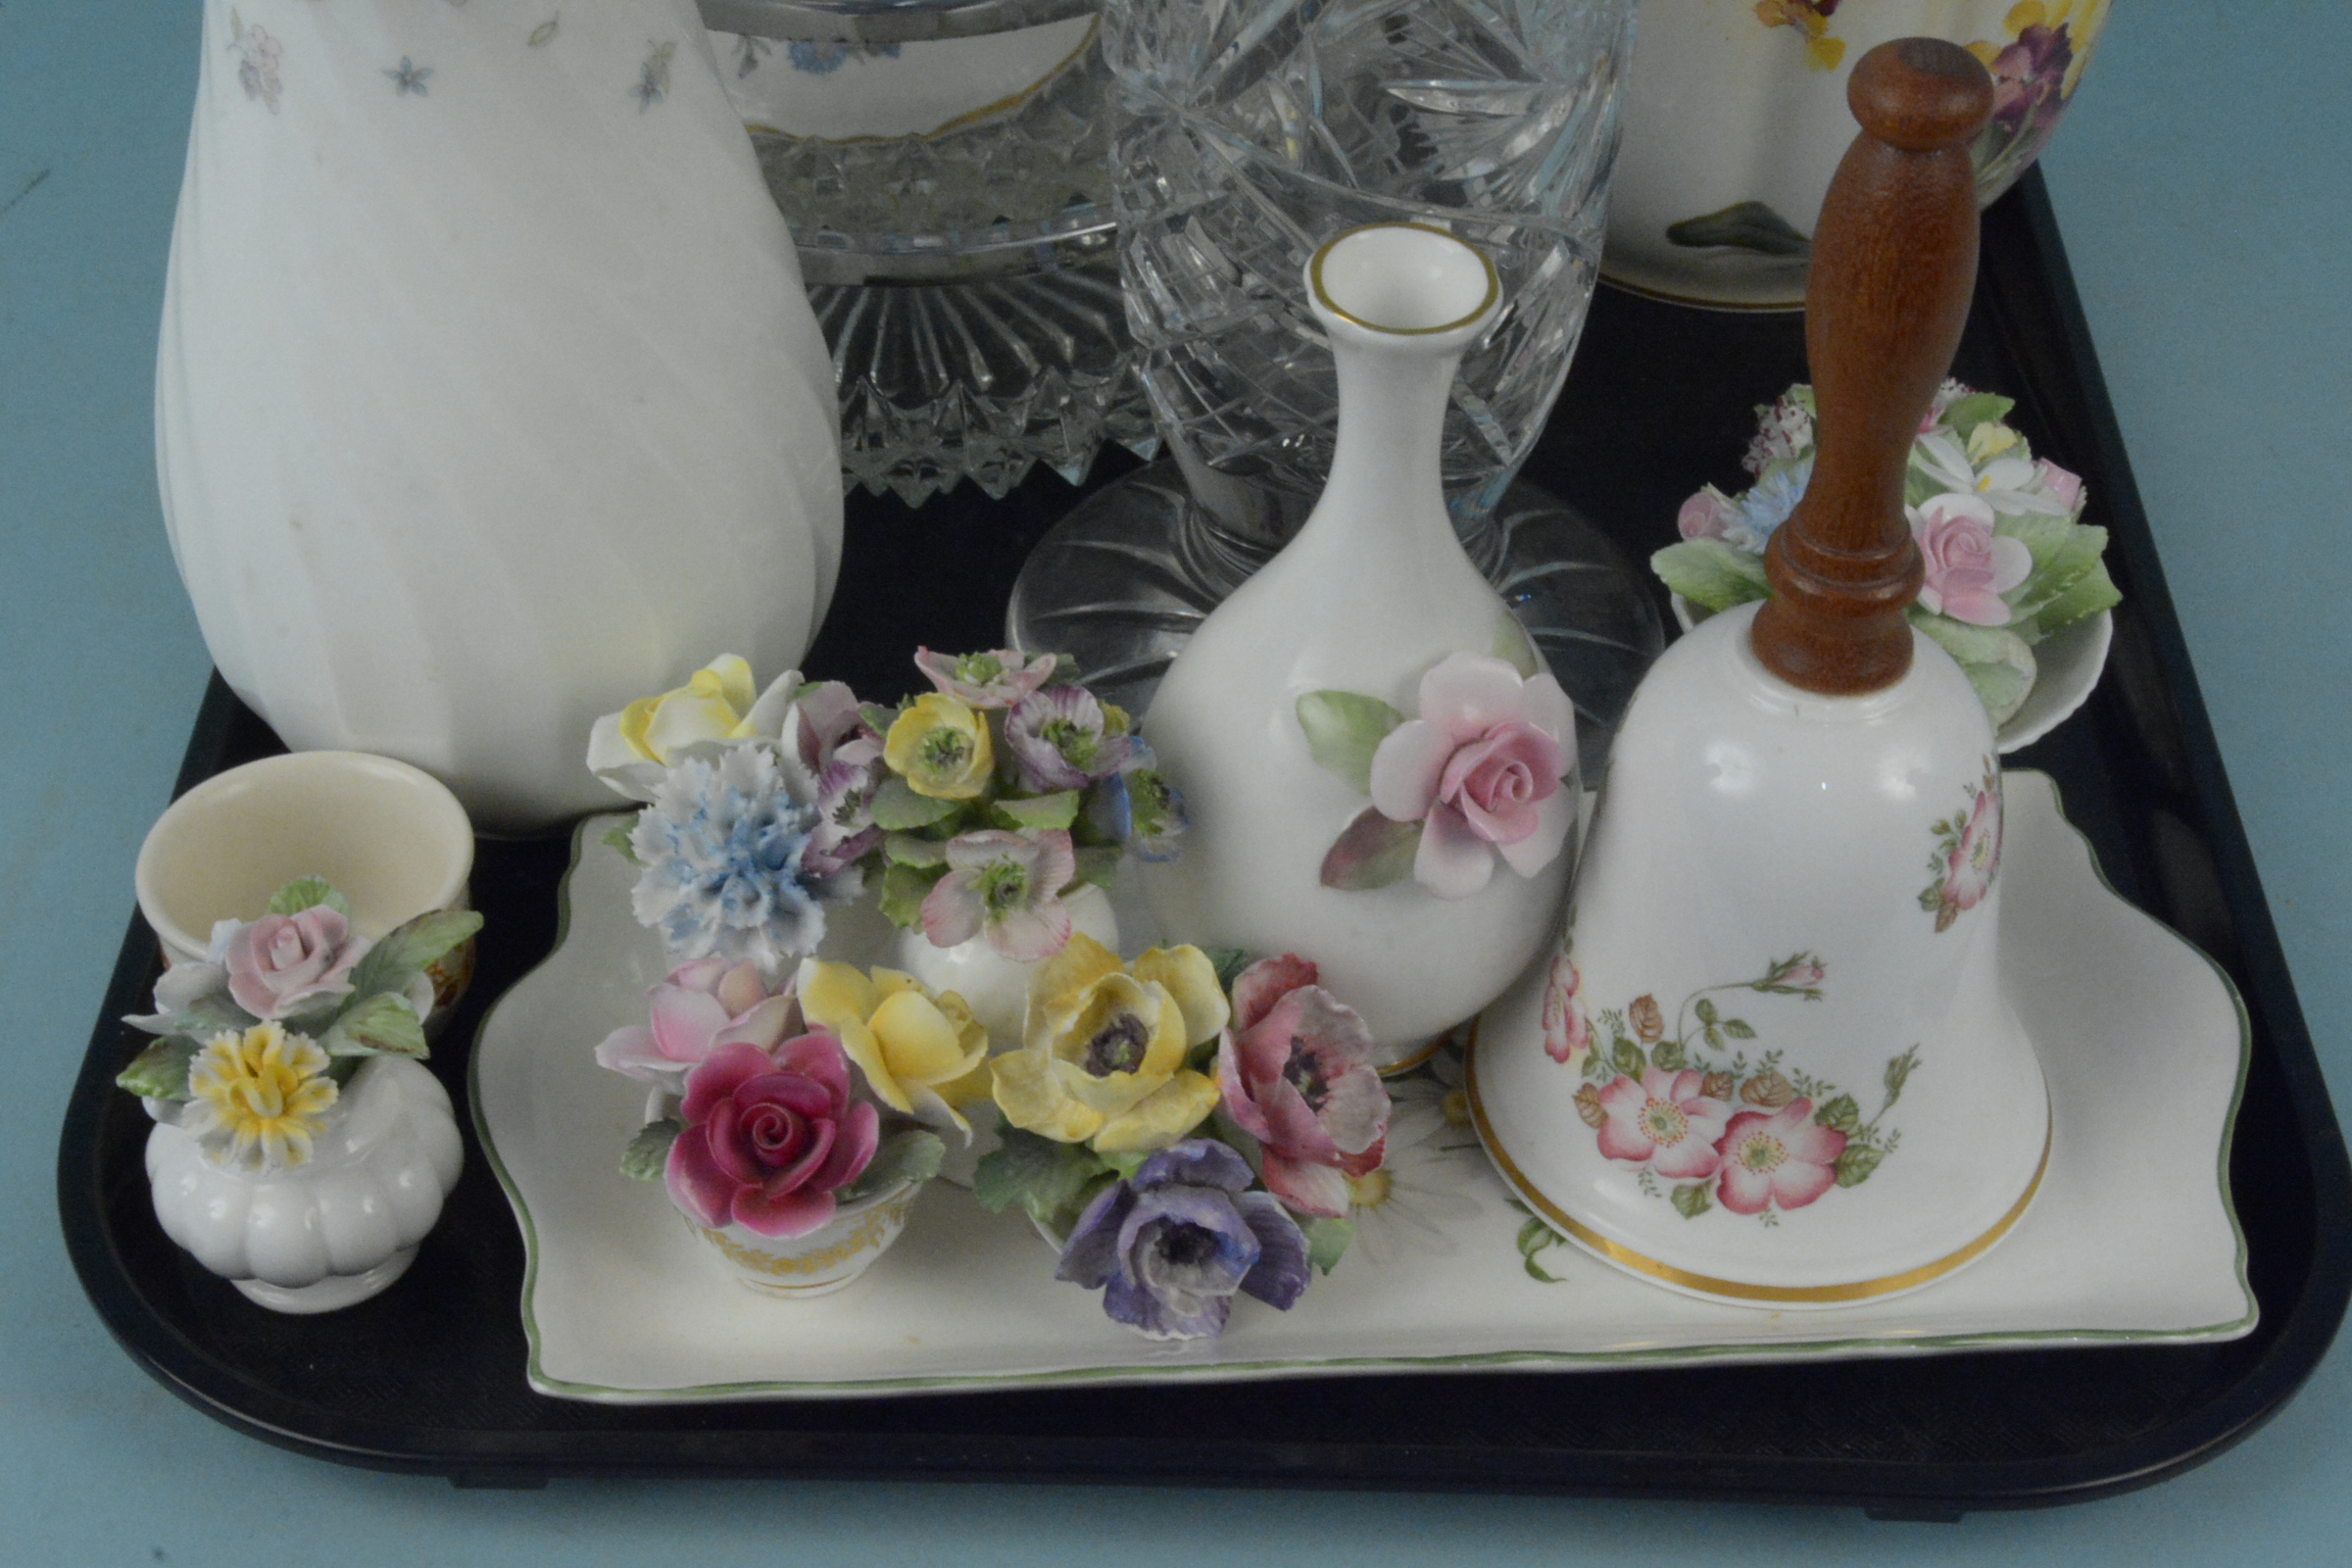 A mixed lot including a George Jones biscuit barrel, ceramic posies, cut glass bowls, - Image 2 of 3